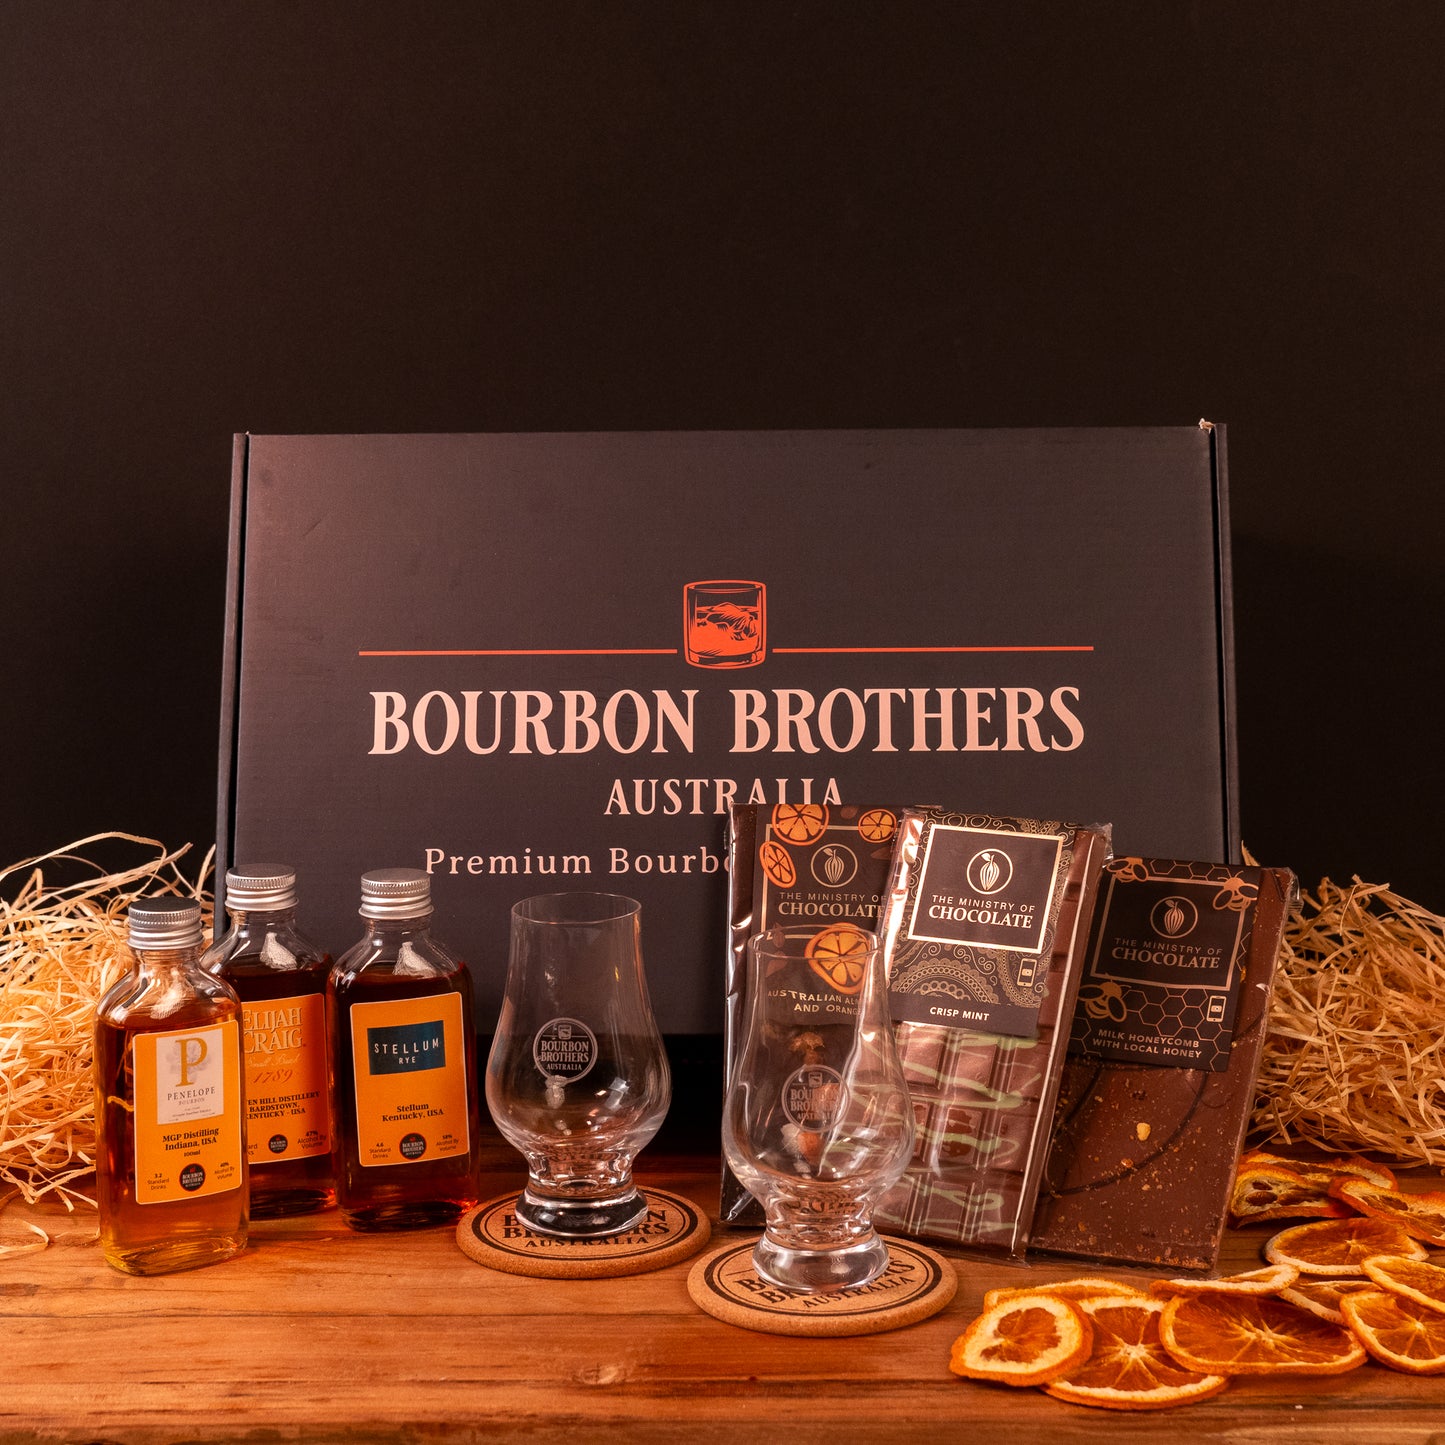 Bourbon and Chocolate Gift Hamper with Bourbon Bothers 3 Bottle Tasting Sample - Bourbon Brothers Australia